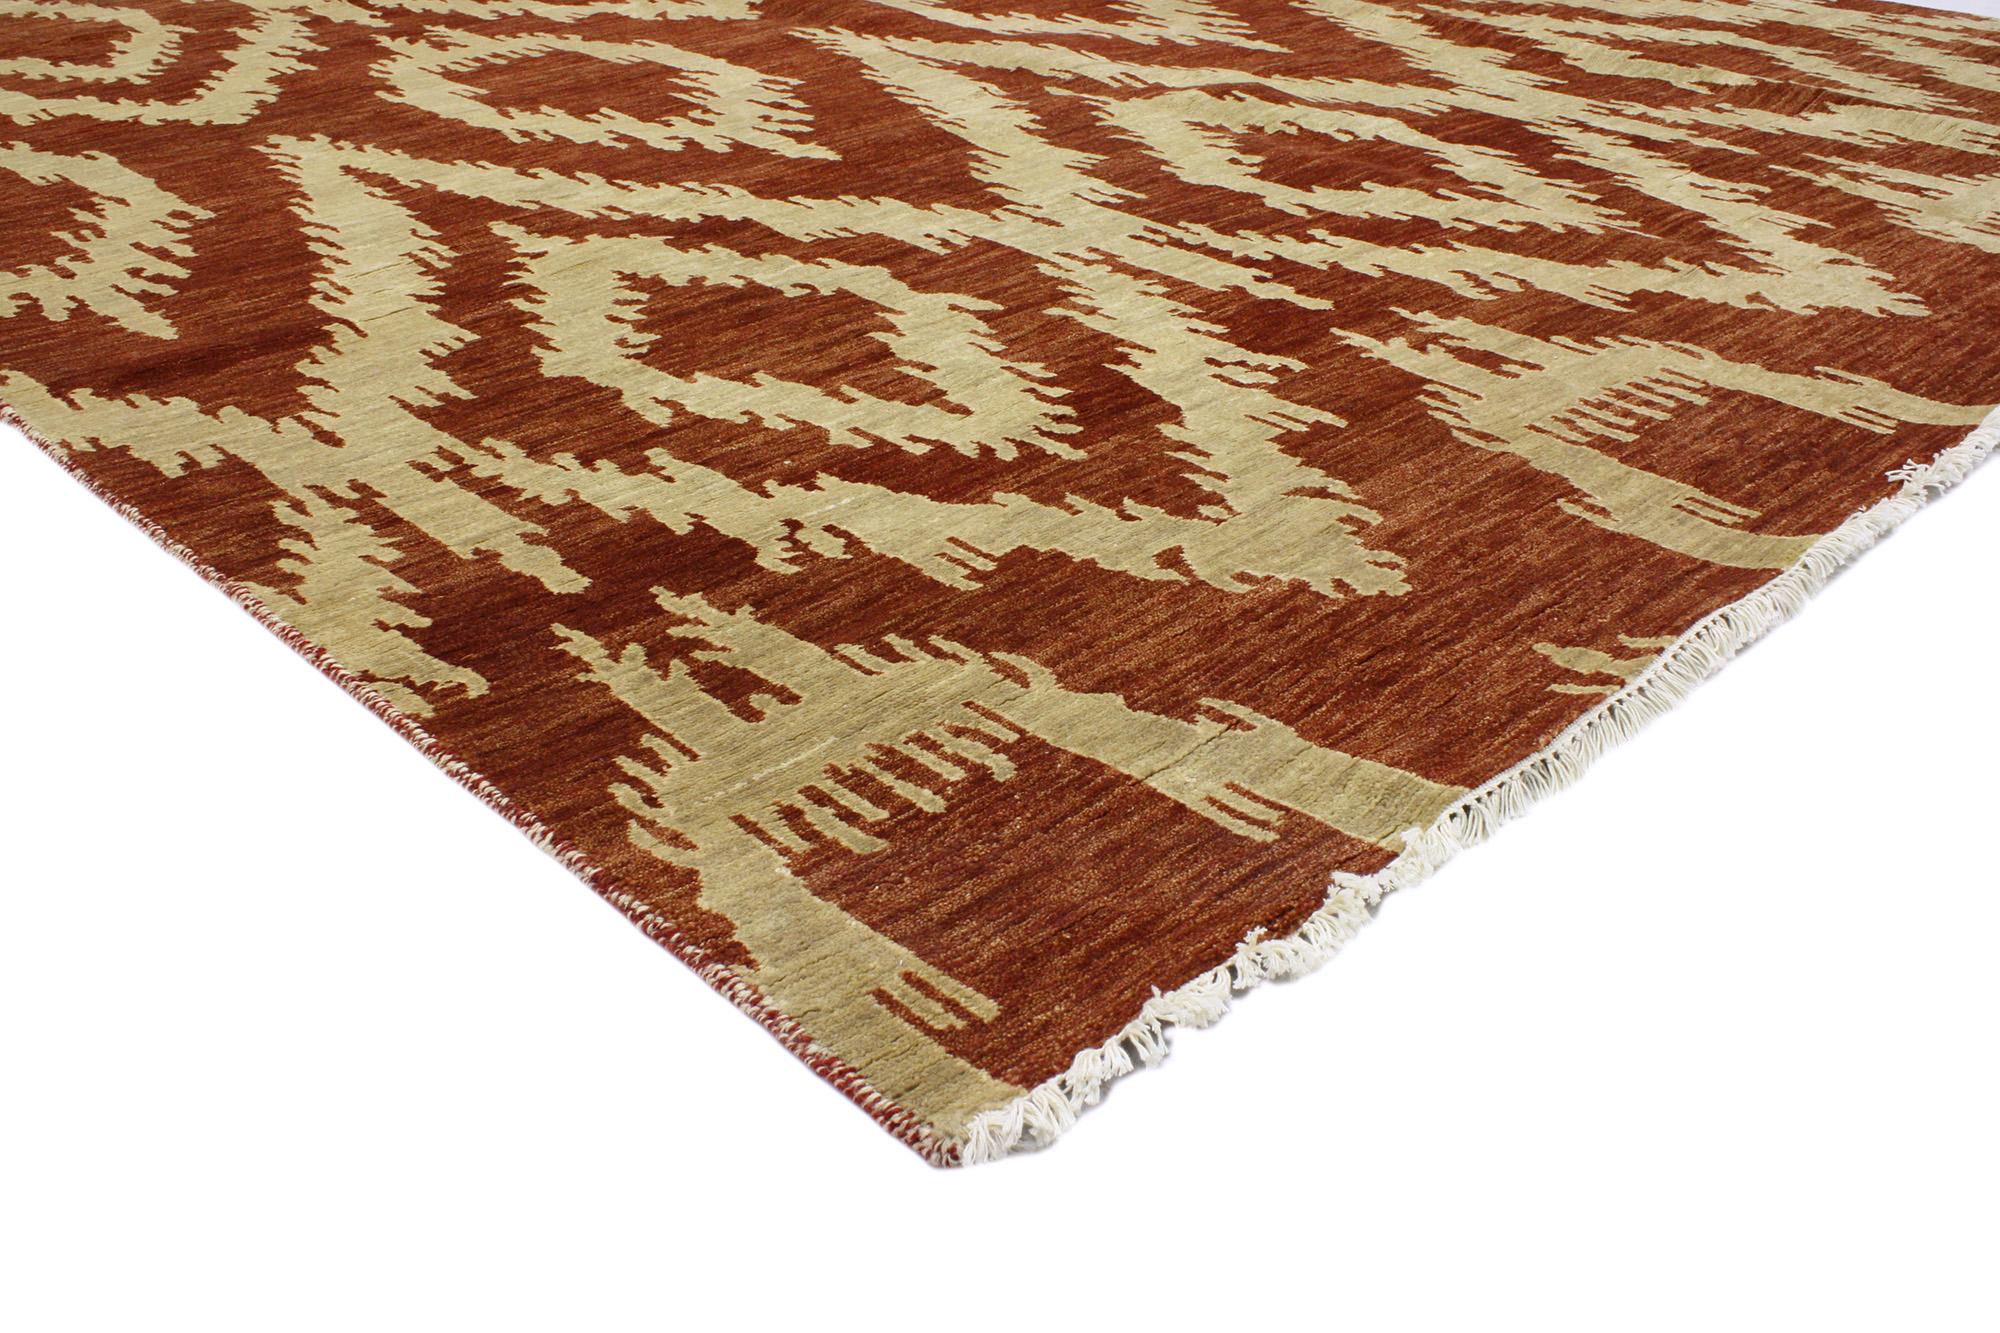 30298 New Transitional Ikat Rug, 08'00 X 10'00.
With its incredible detail and texture, this hand knotted wool Ikat rug from India is a captivating vision of woven beauty. The eye-catching ikat design and colorway woven into this piece work together